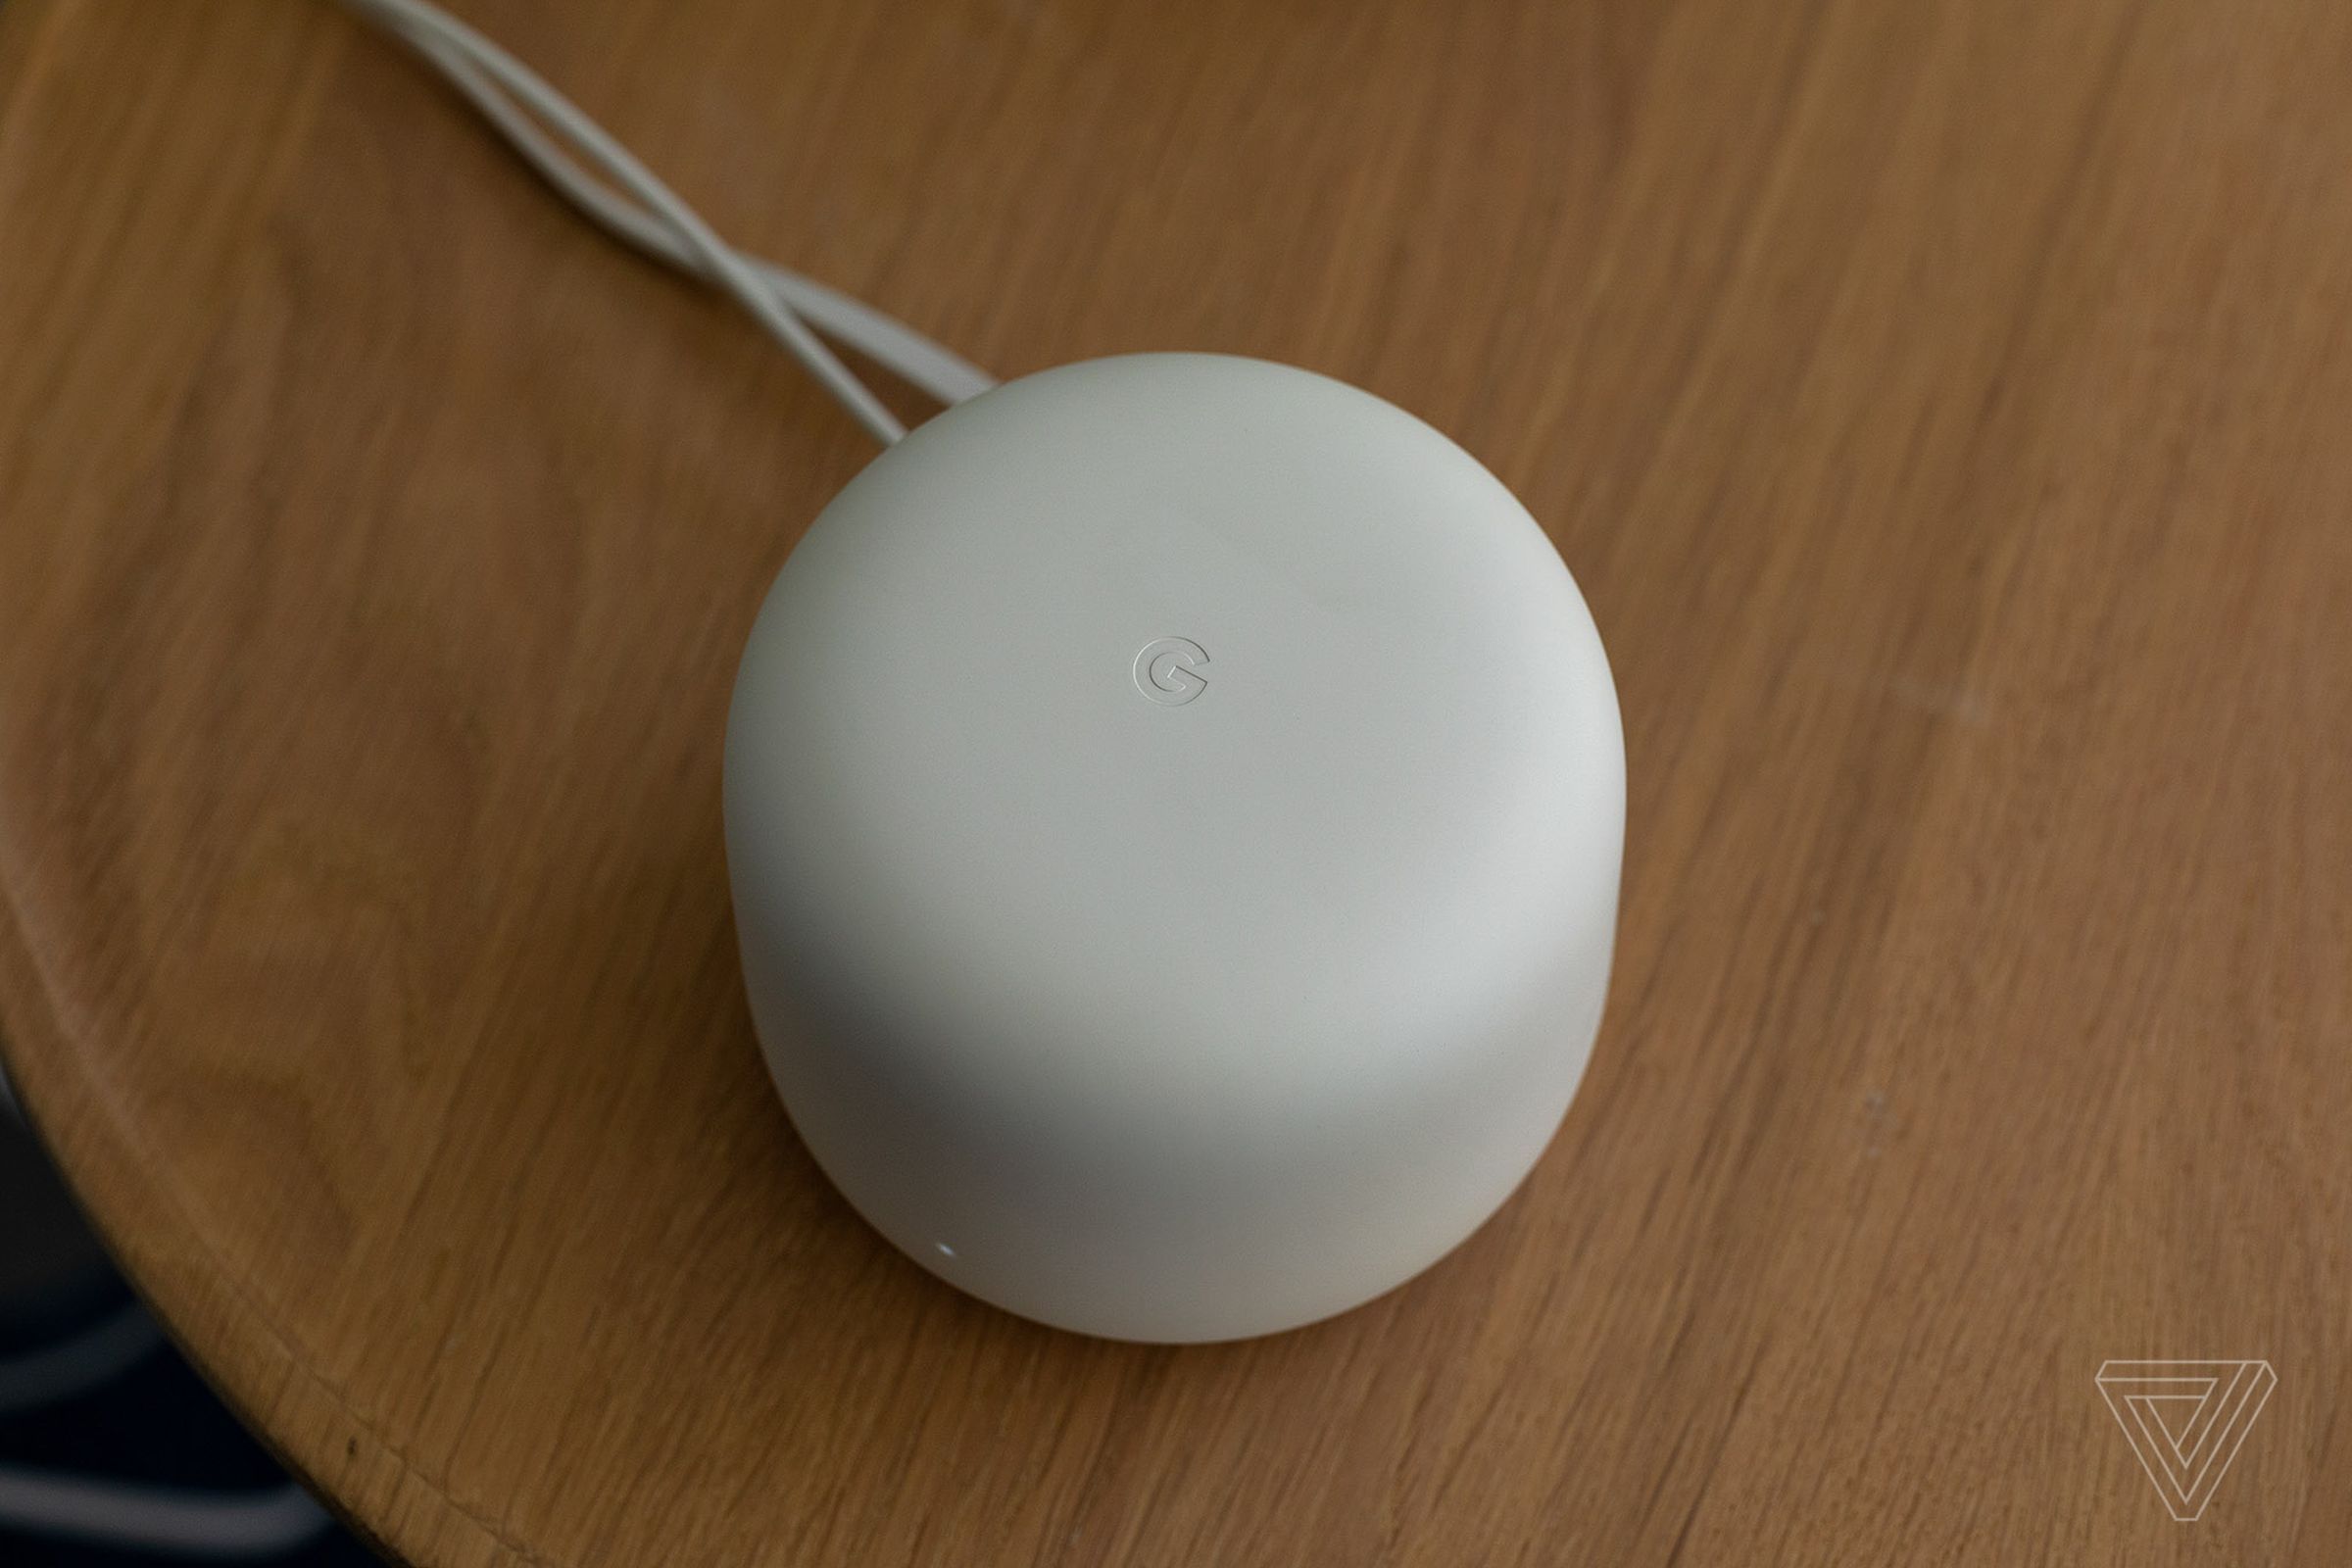 There are no obnoxious antennas sticking out of the Nest Wifi.